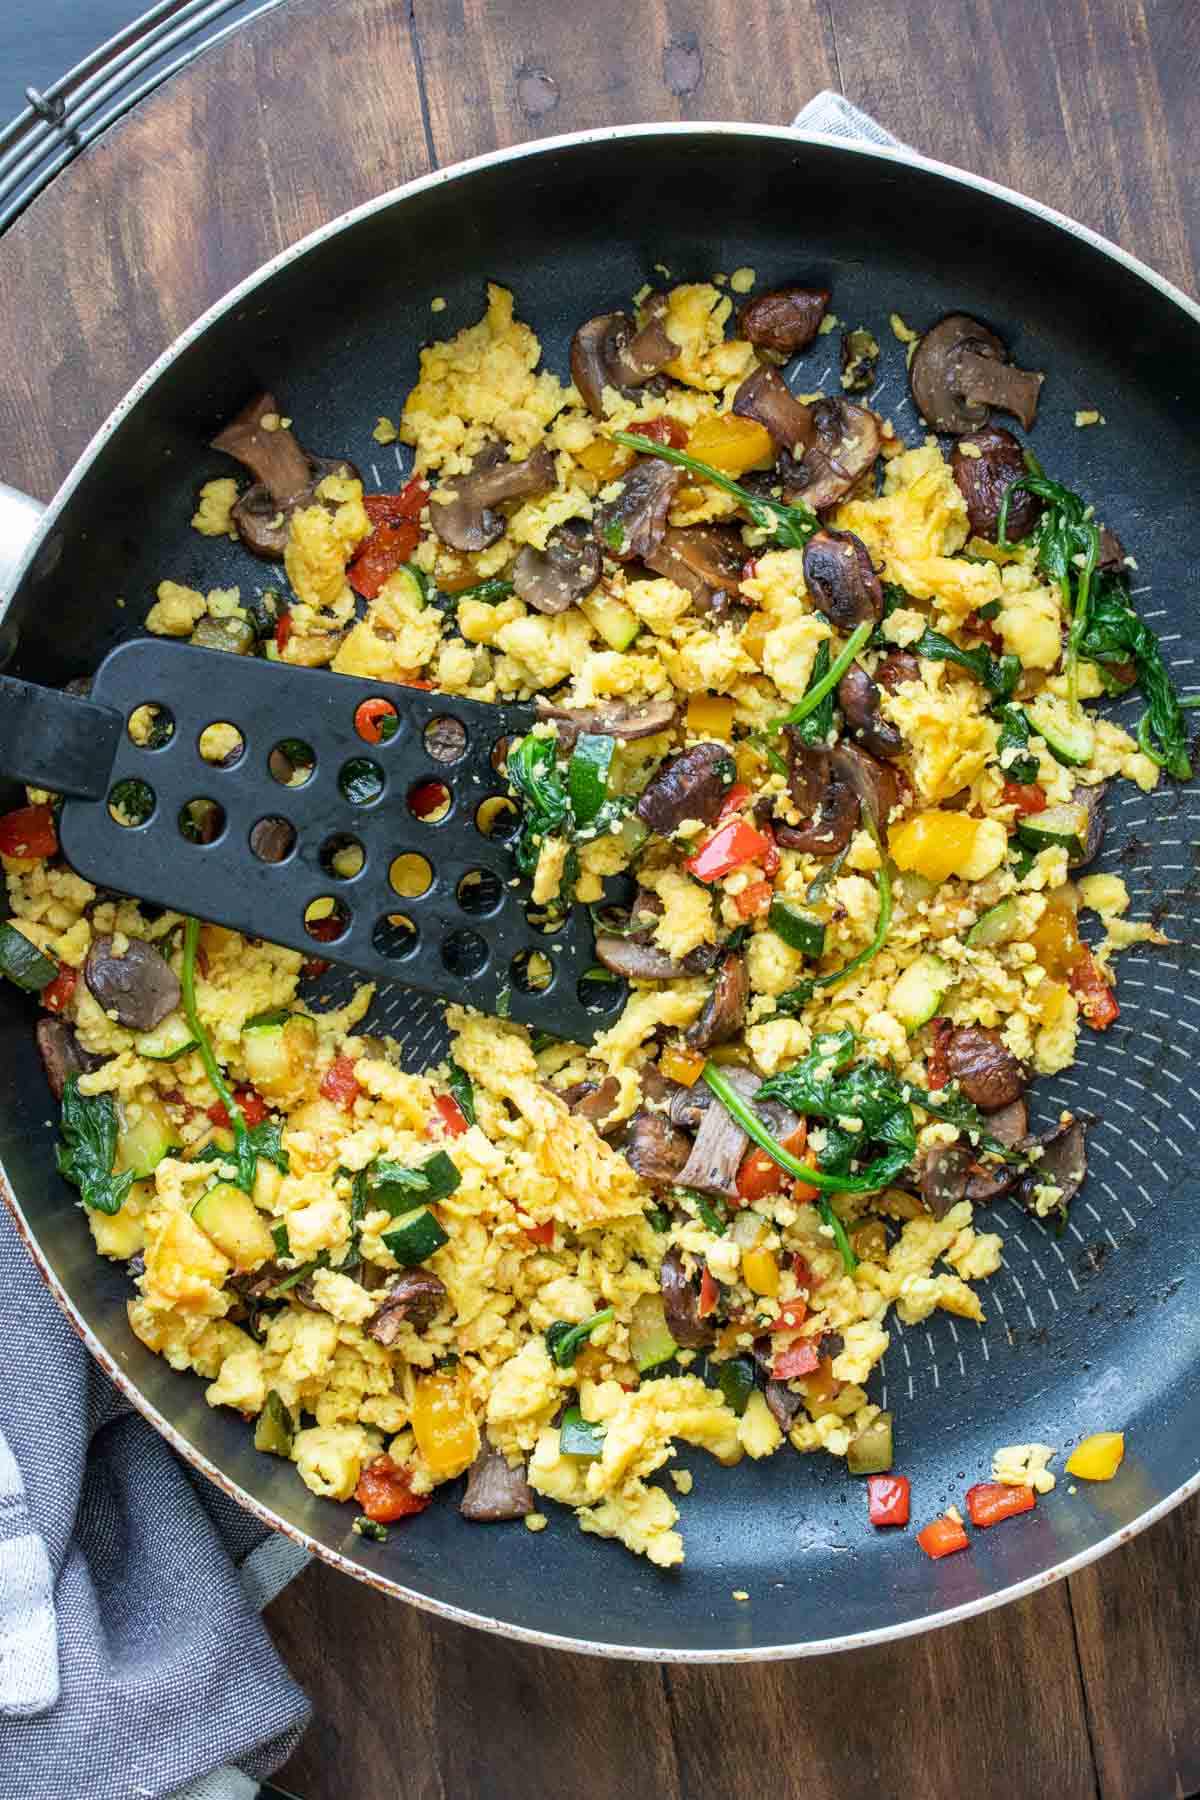 Spatula mixing scrambled eggs with veggies in a pan